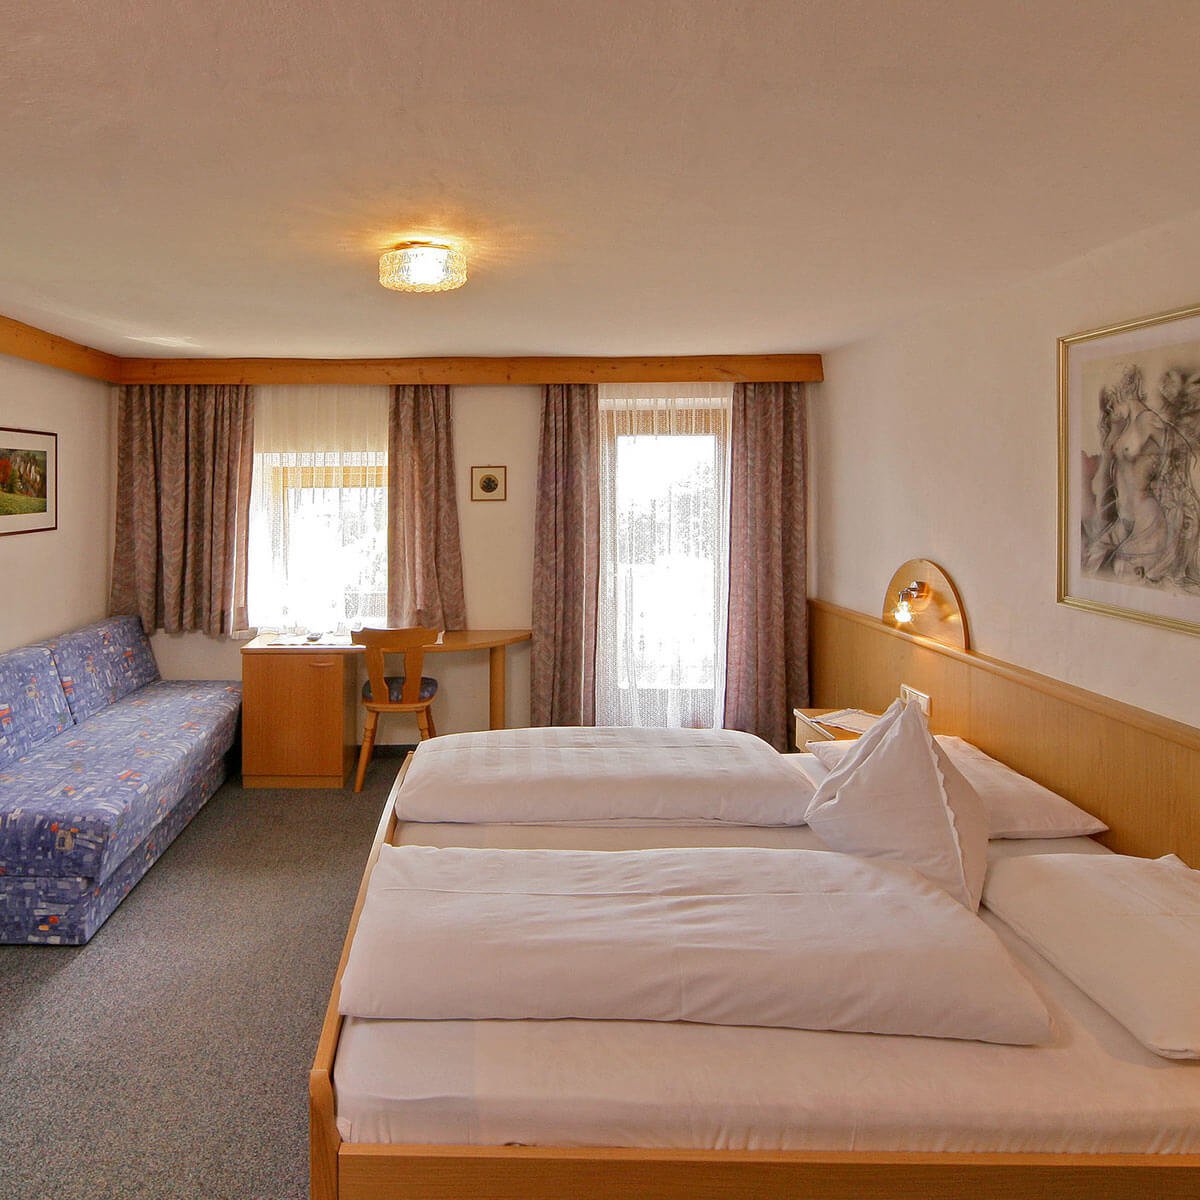 Our rooms for your holidays in Terenten